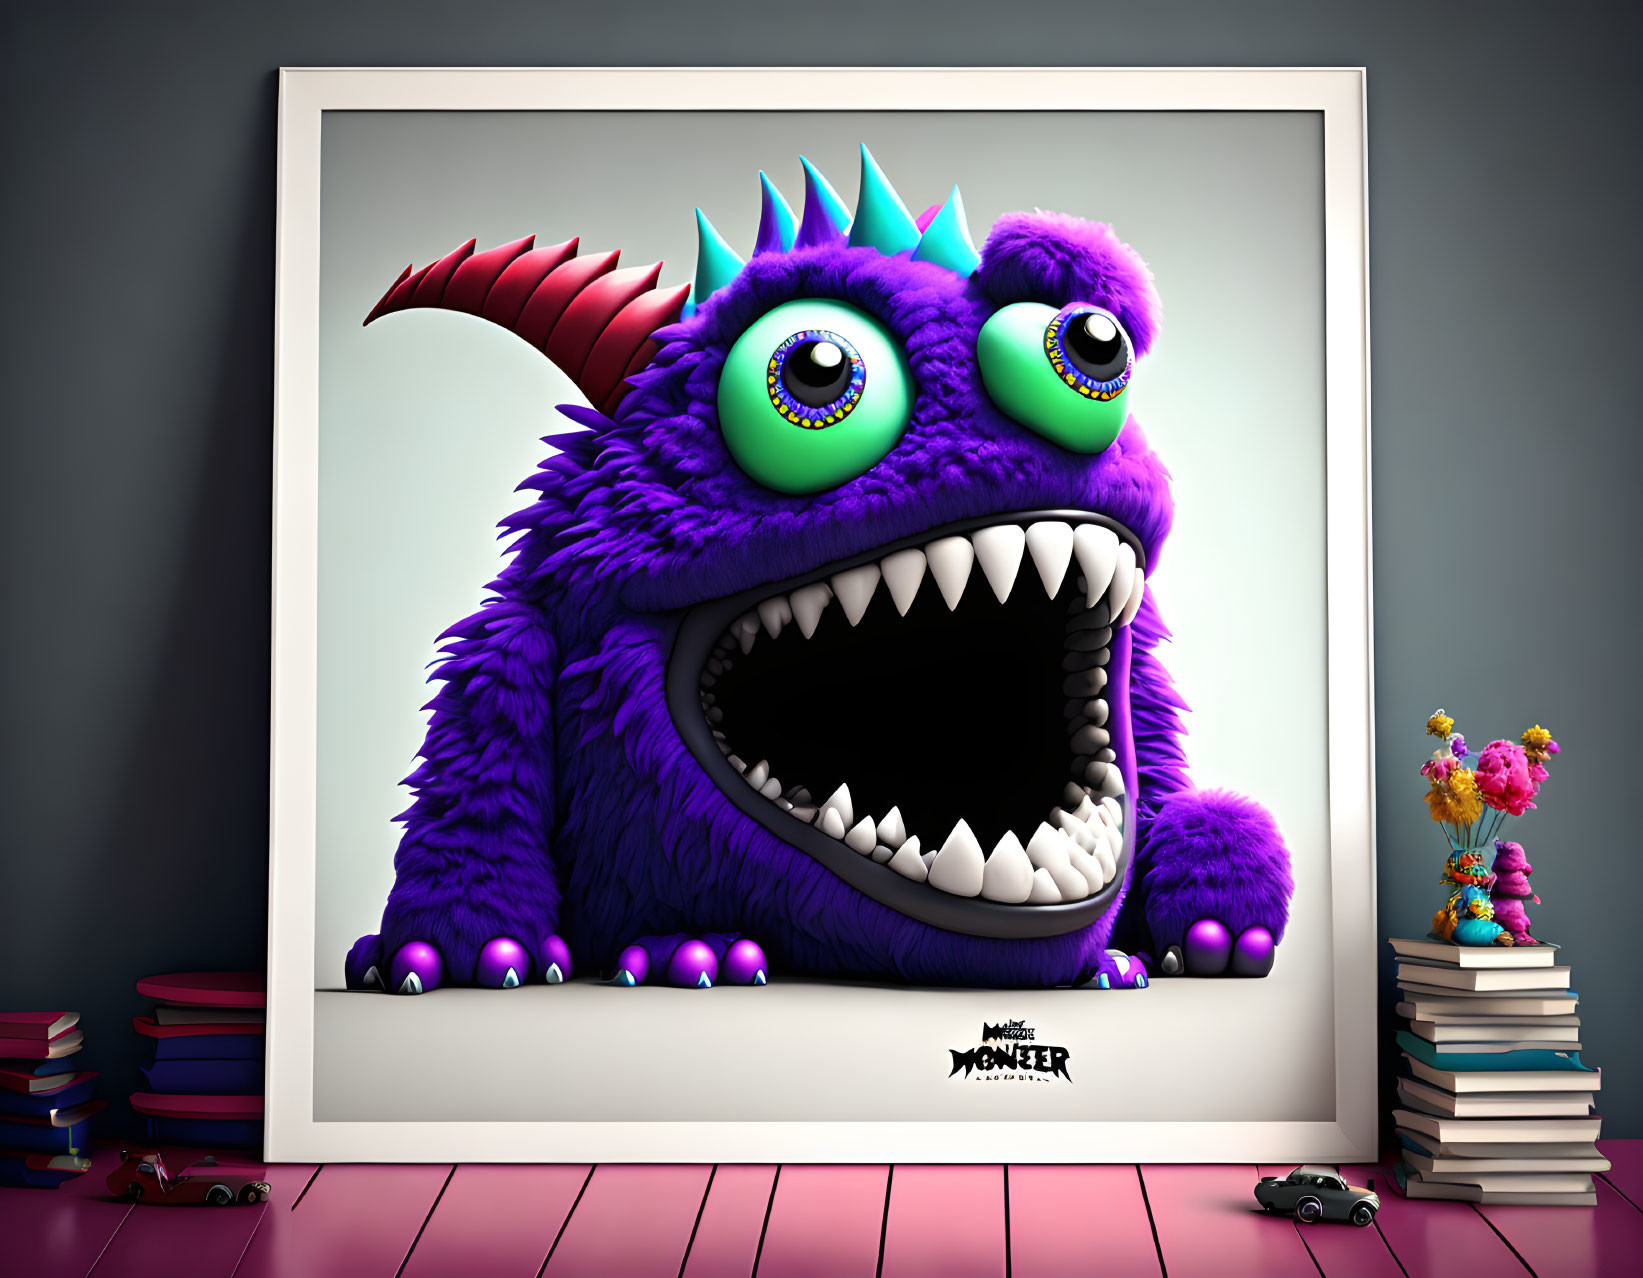 Colorful Purple Monster Artwork with Green Eyes and Spikes on Wall Display